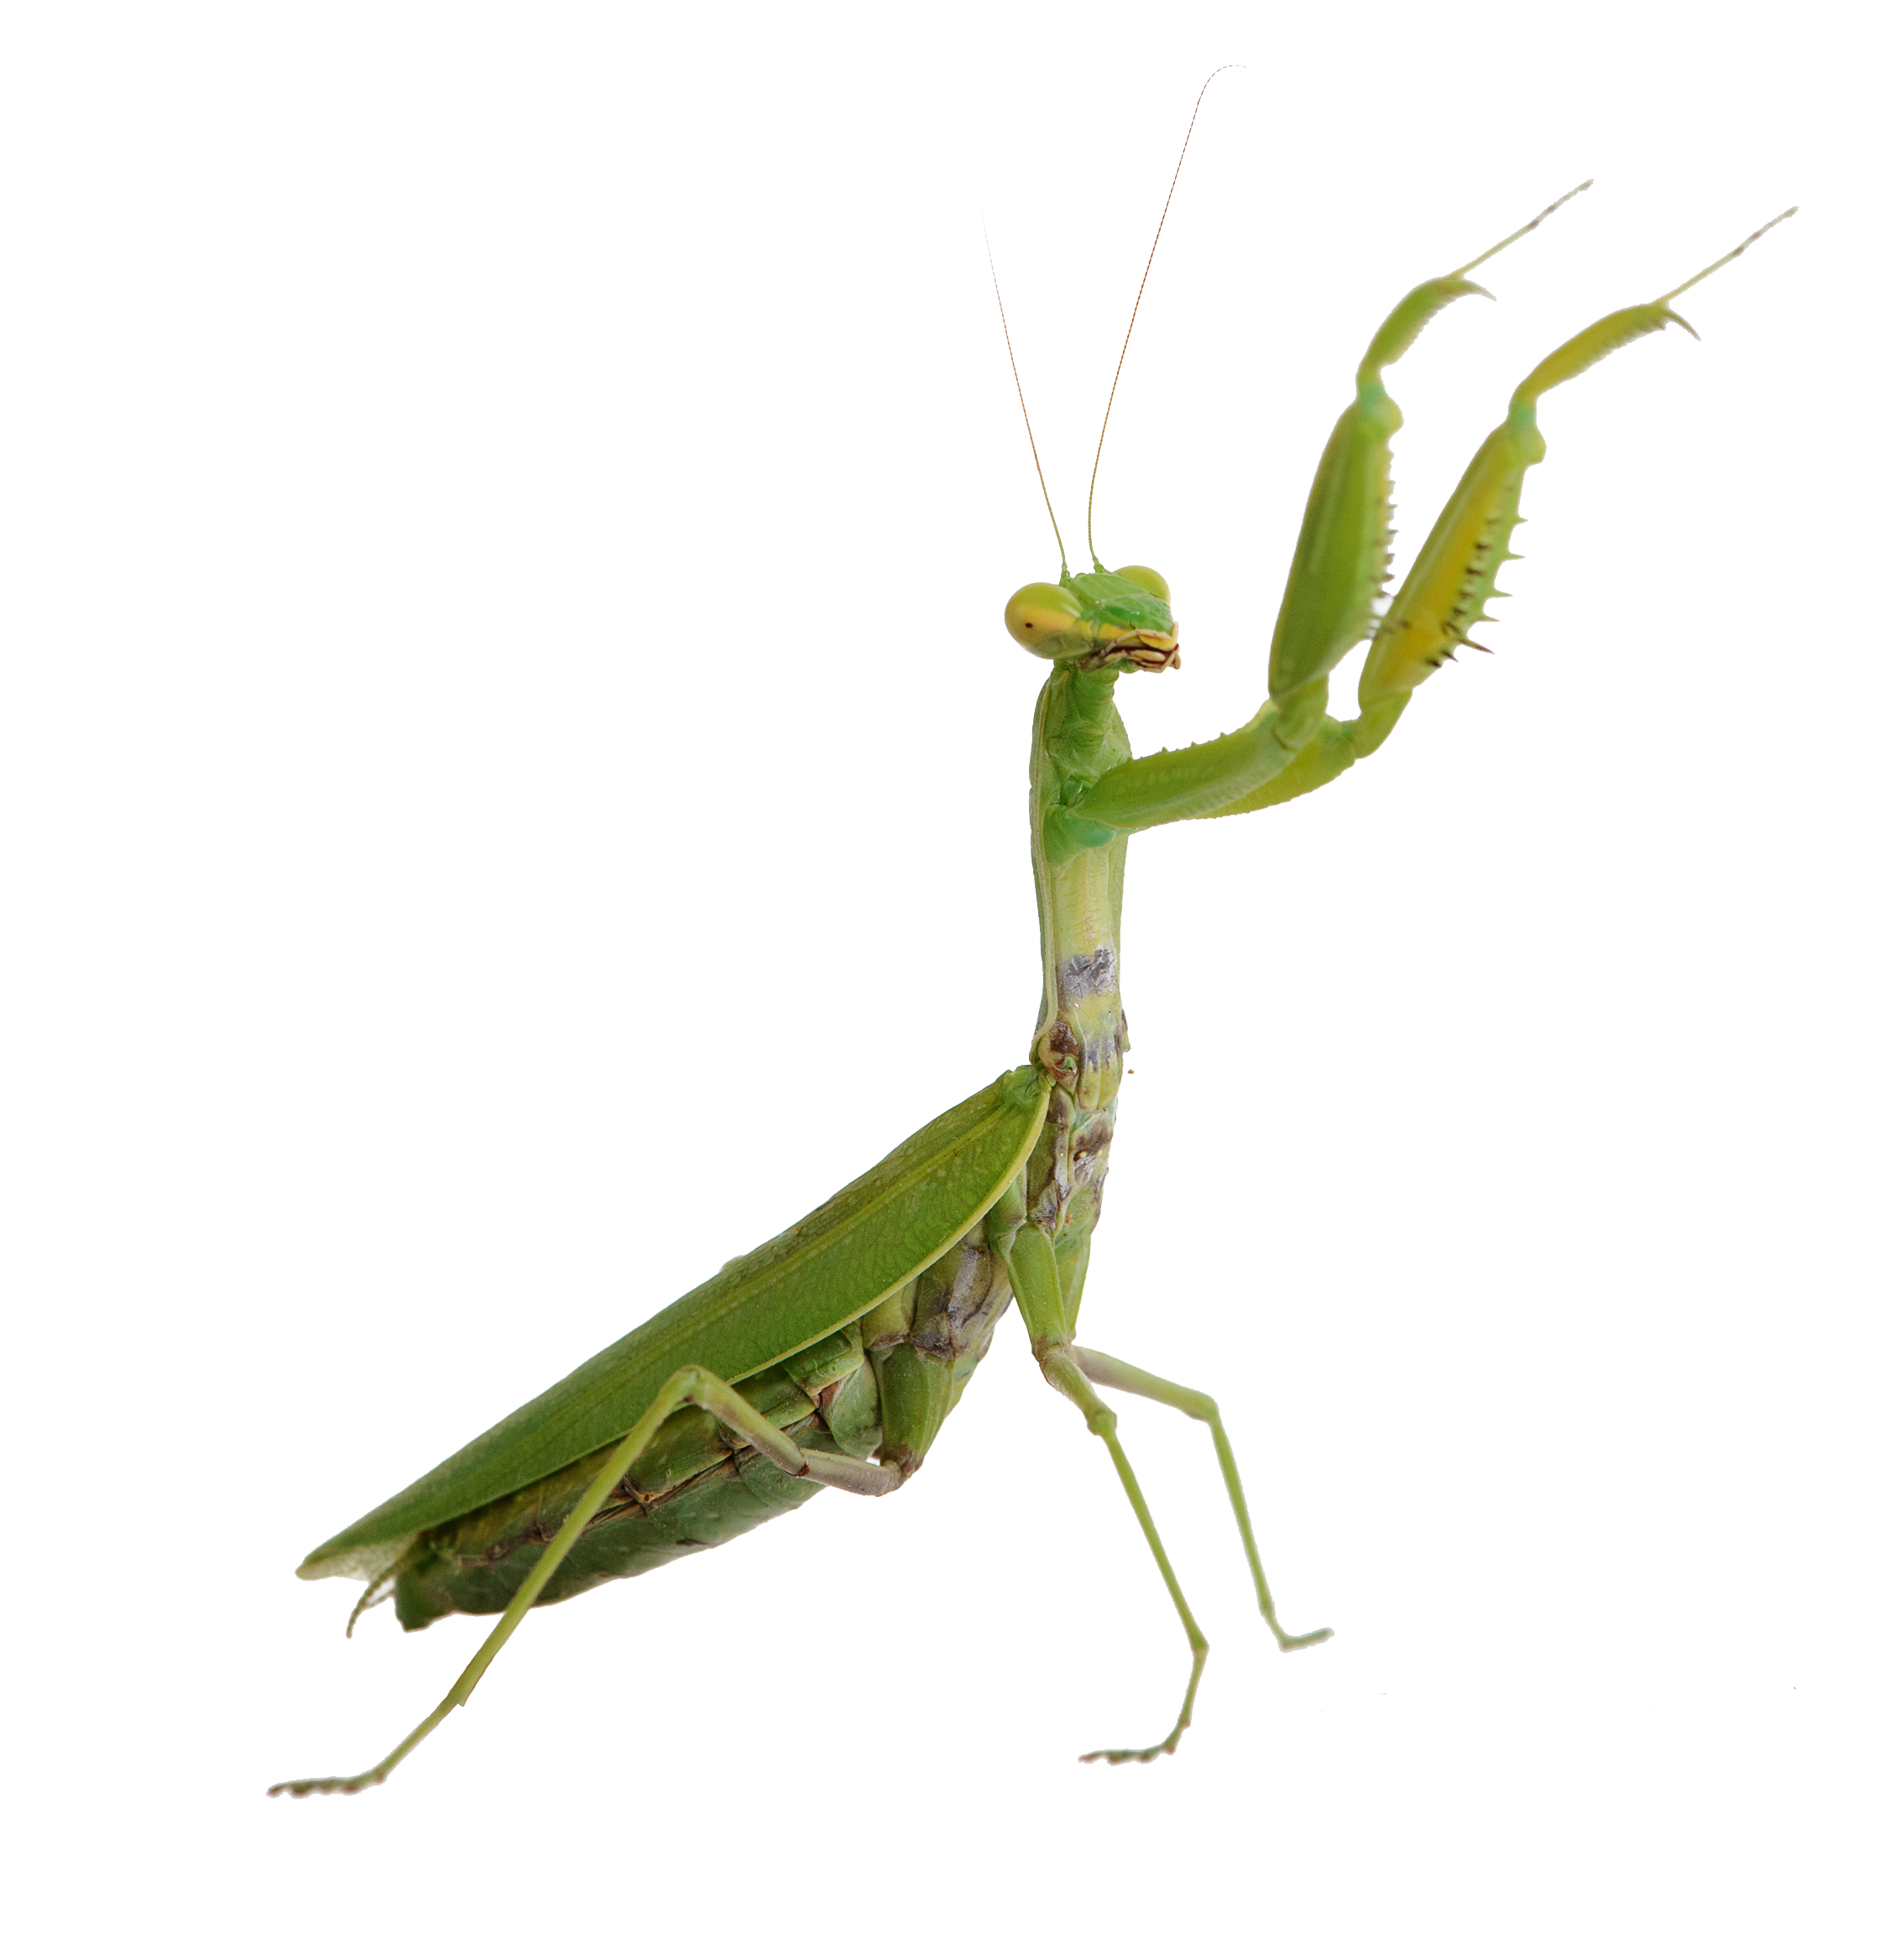 Photo of a praying mantis with it's front legs outstretched on a white background.